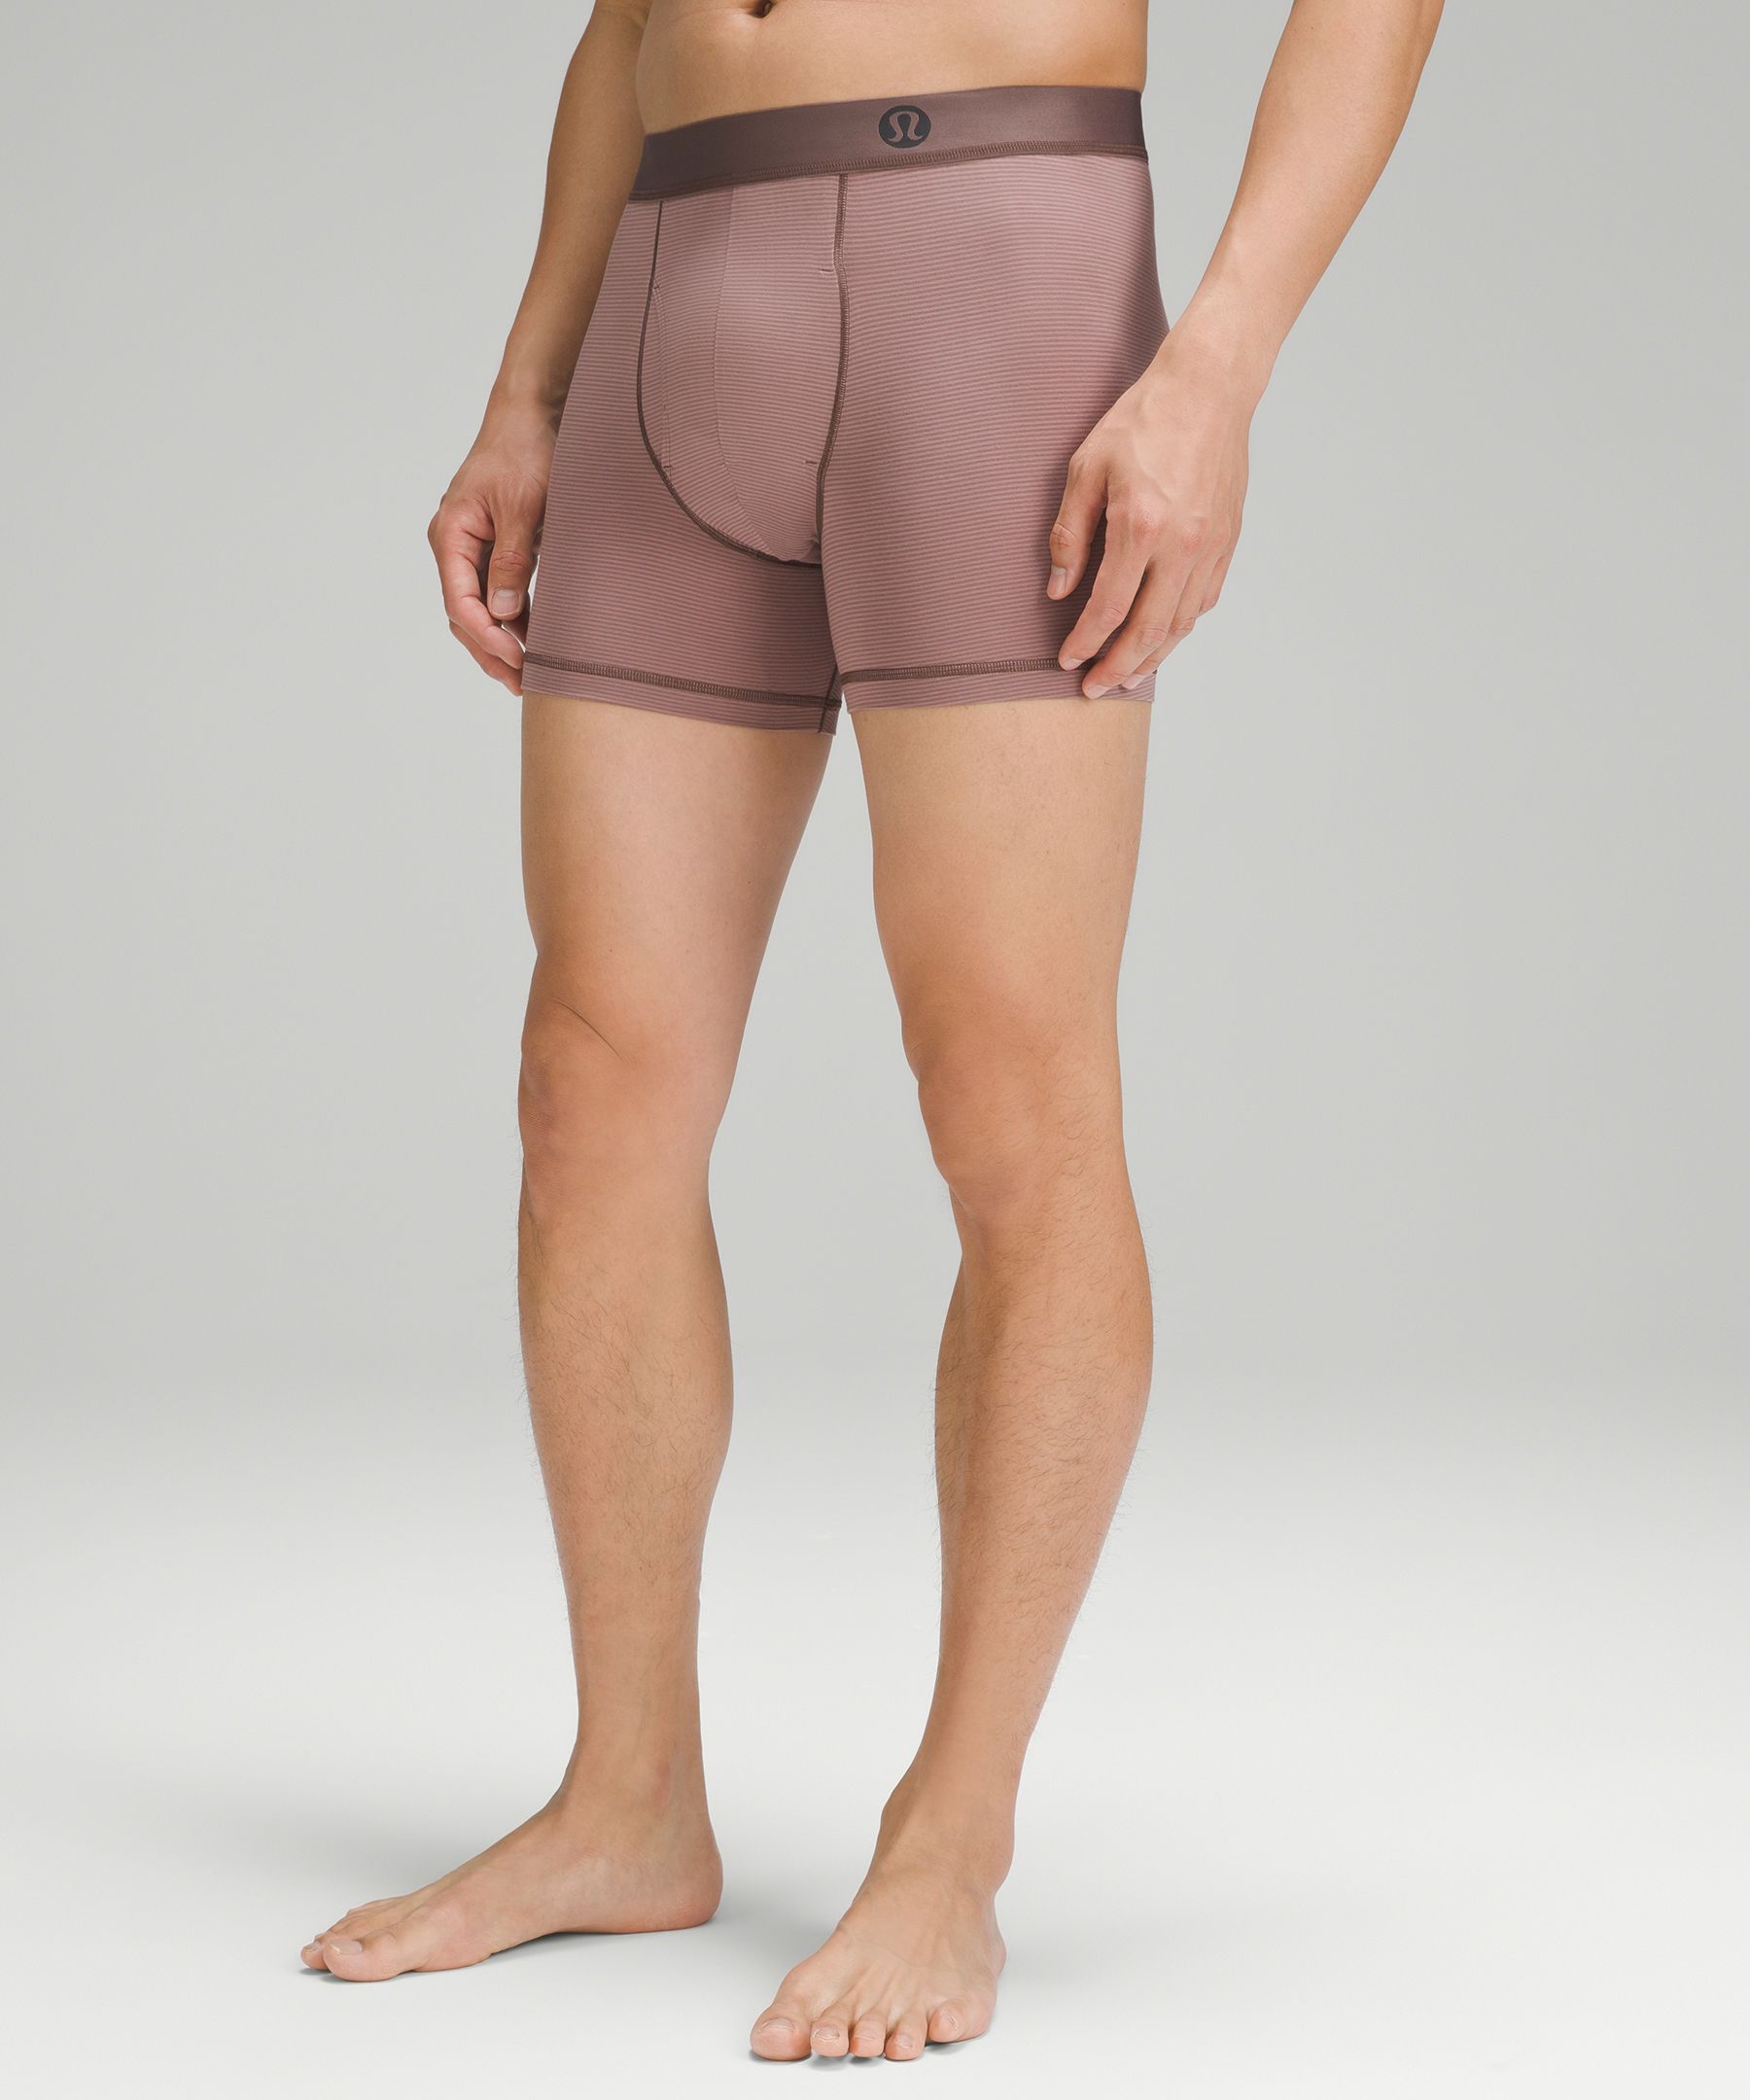 Lululemon Always In Motion Boxer with Fly 5" 3 Pack *Online Only. 2